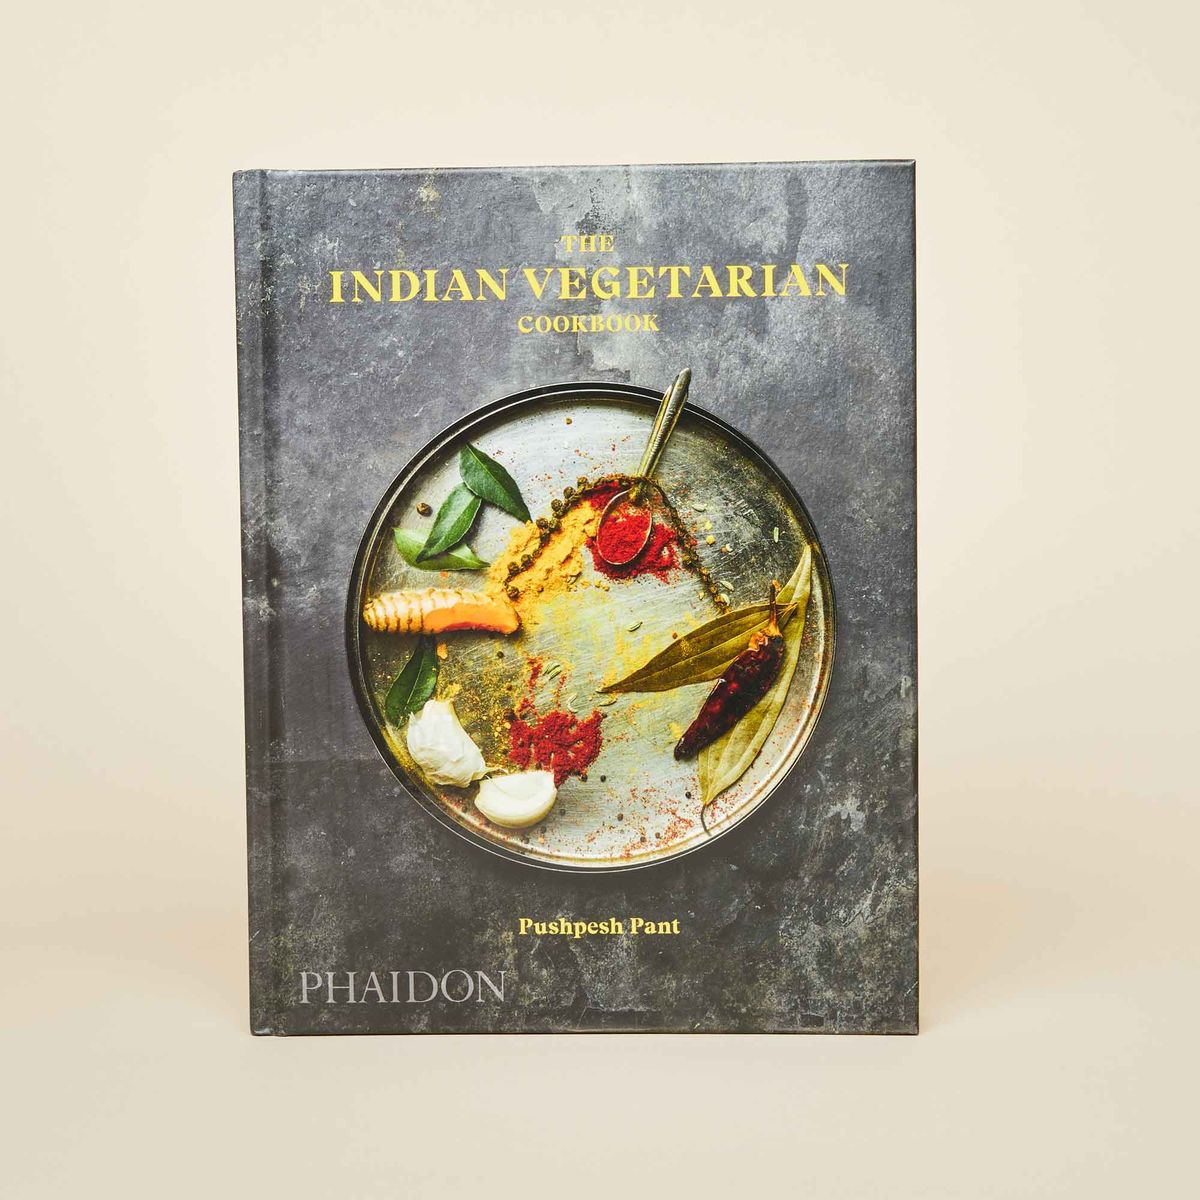 The Indian Vegetarian, a book by Pushpesh Pant front cover